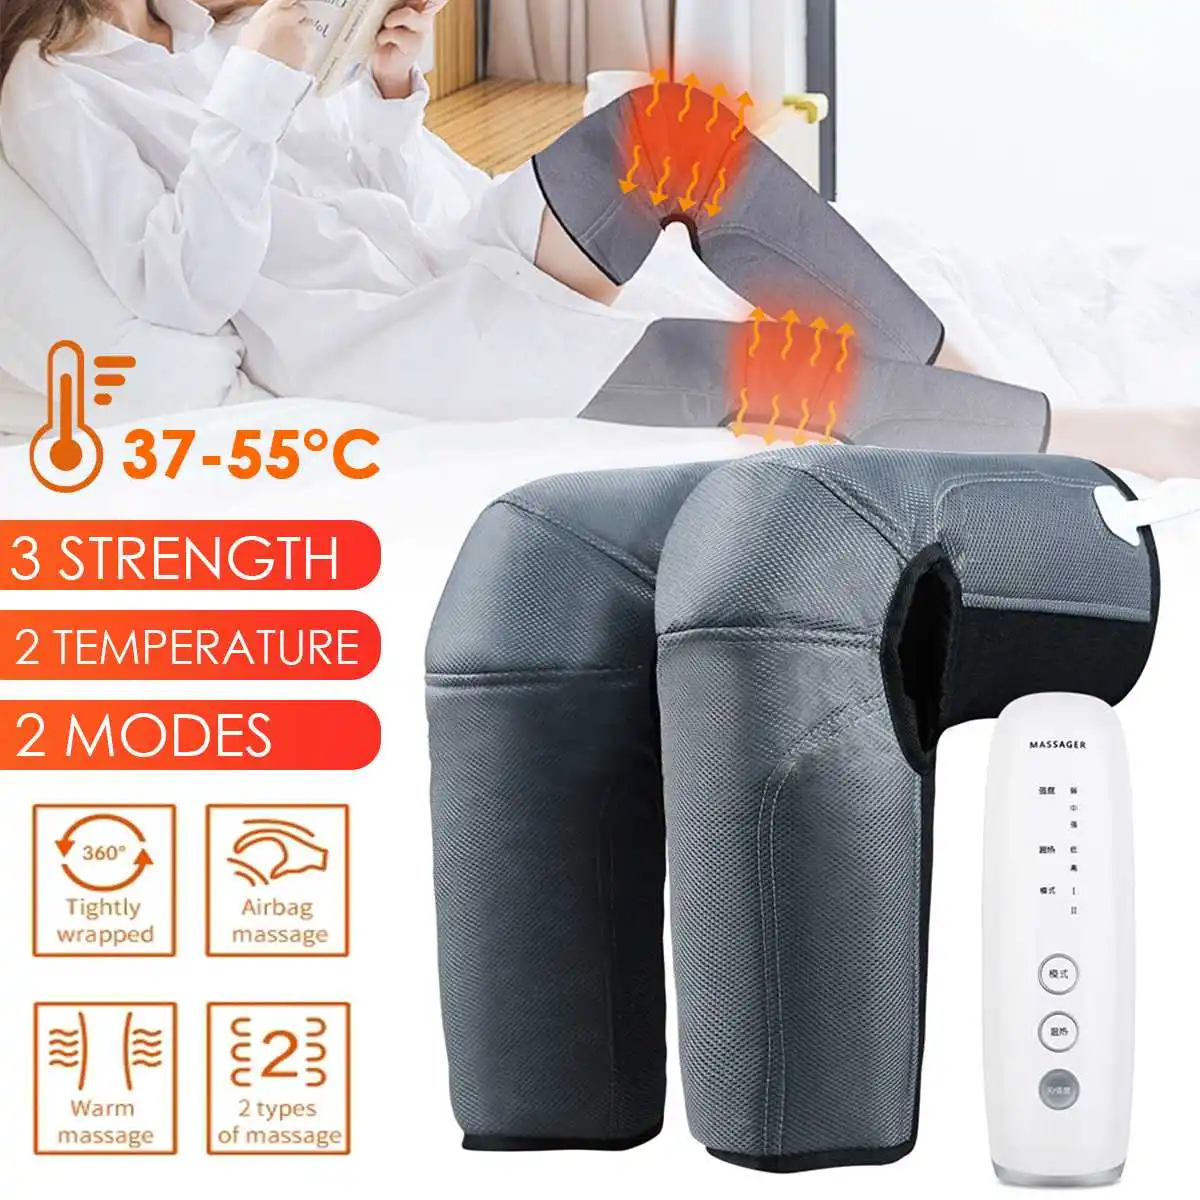 2 Modes Leg Air Compression Massager Heated for Thigh Knee and Calf Circulation 3 Intensities 2 Temperatures Massage Relaxation